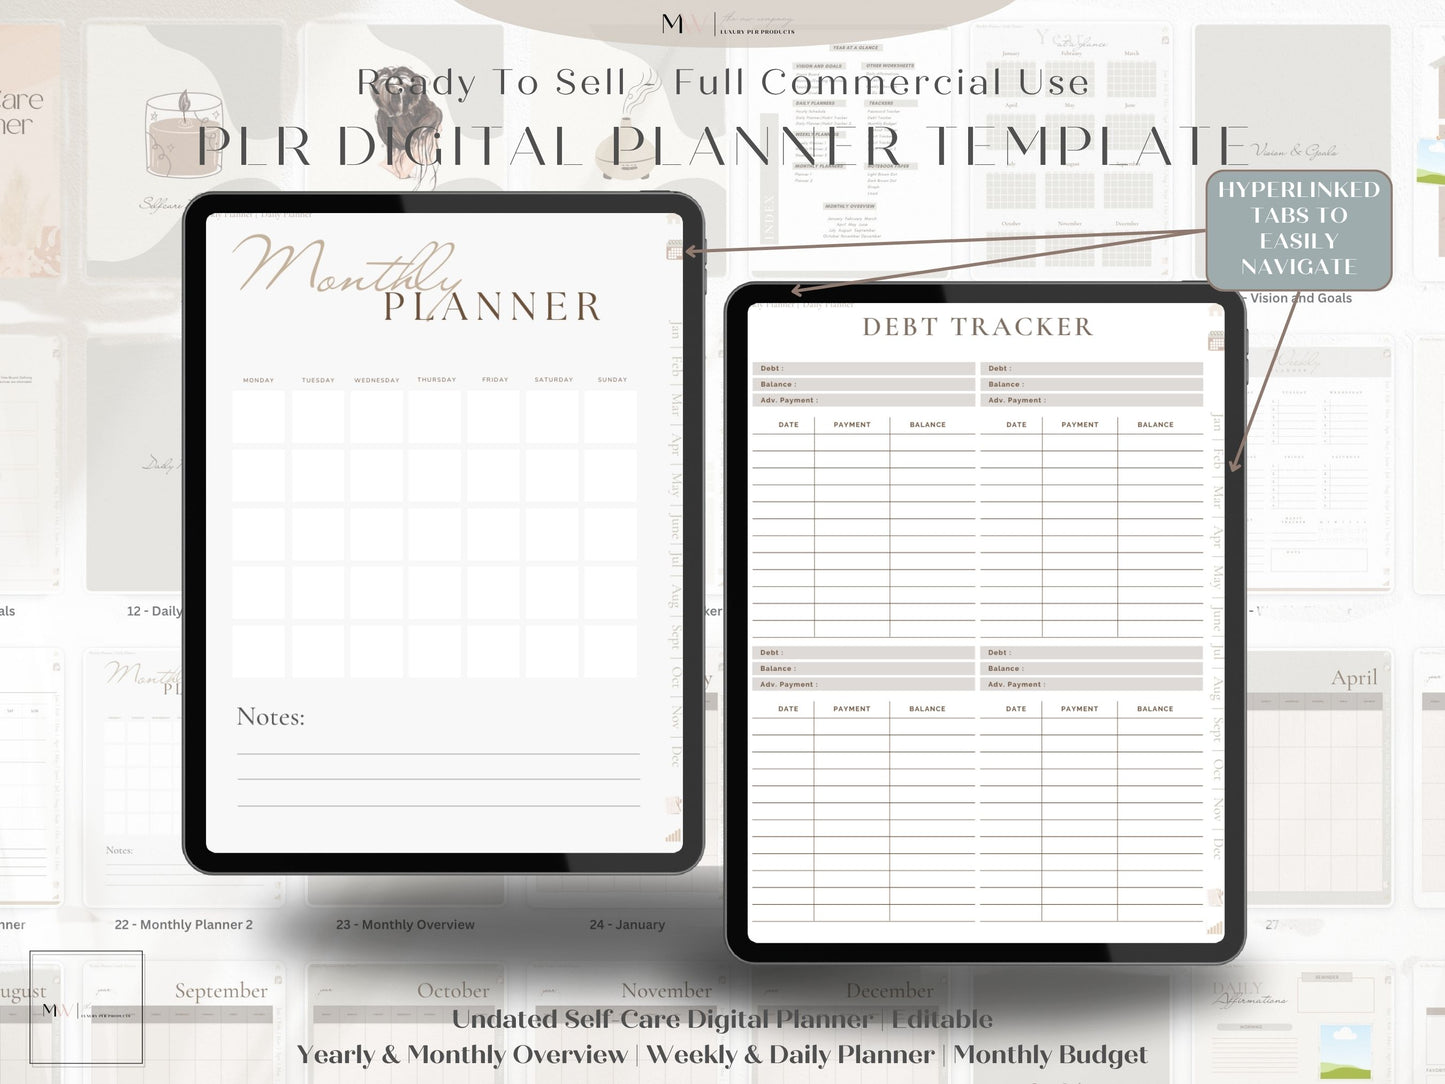 This page shows more information about the PLR digital planner template including navigation tabs.